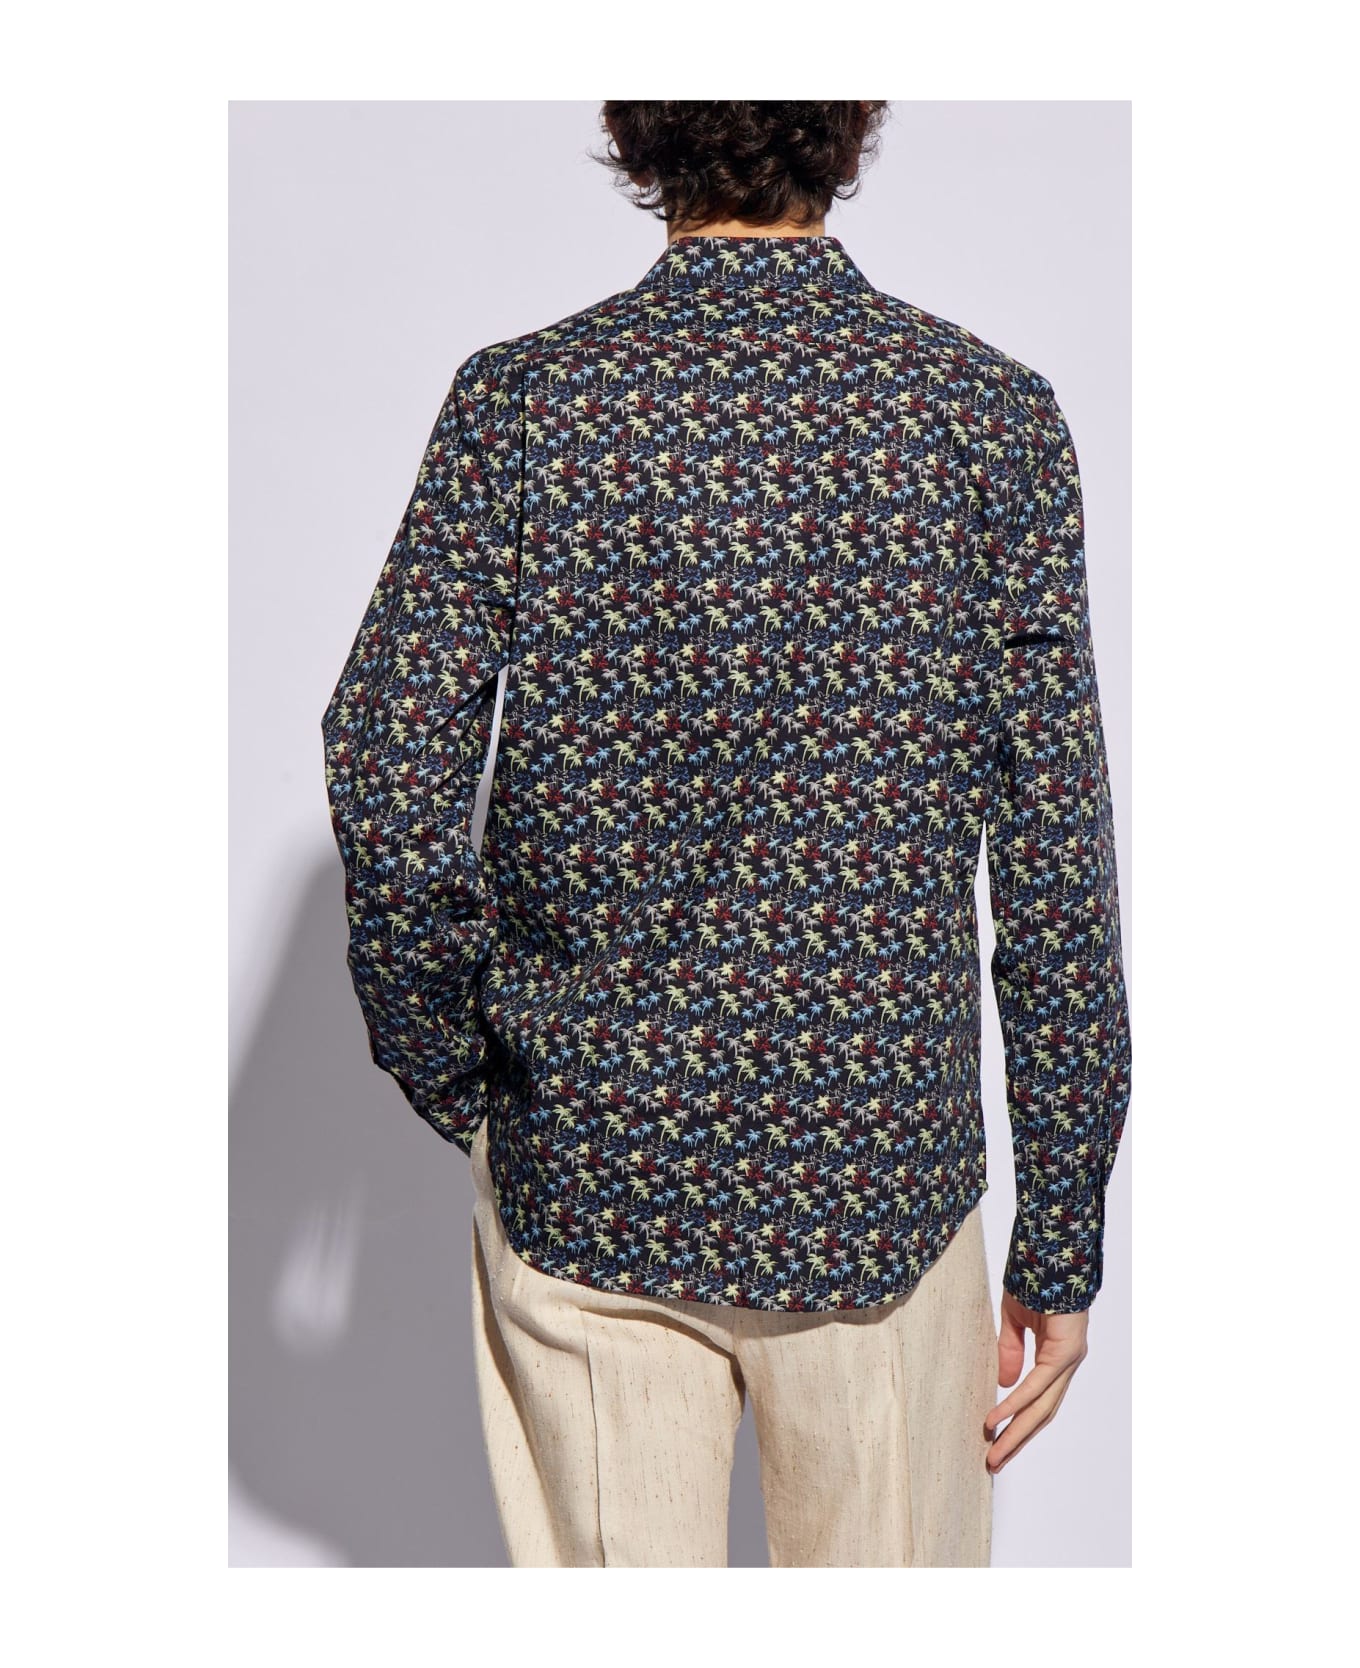 Paul Smith Ps Paul Smith Patterned Shirt - Black